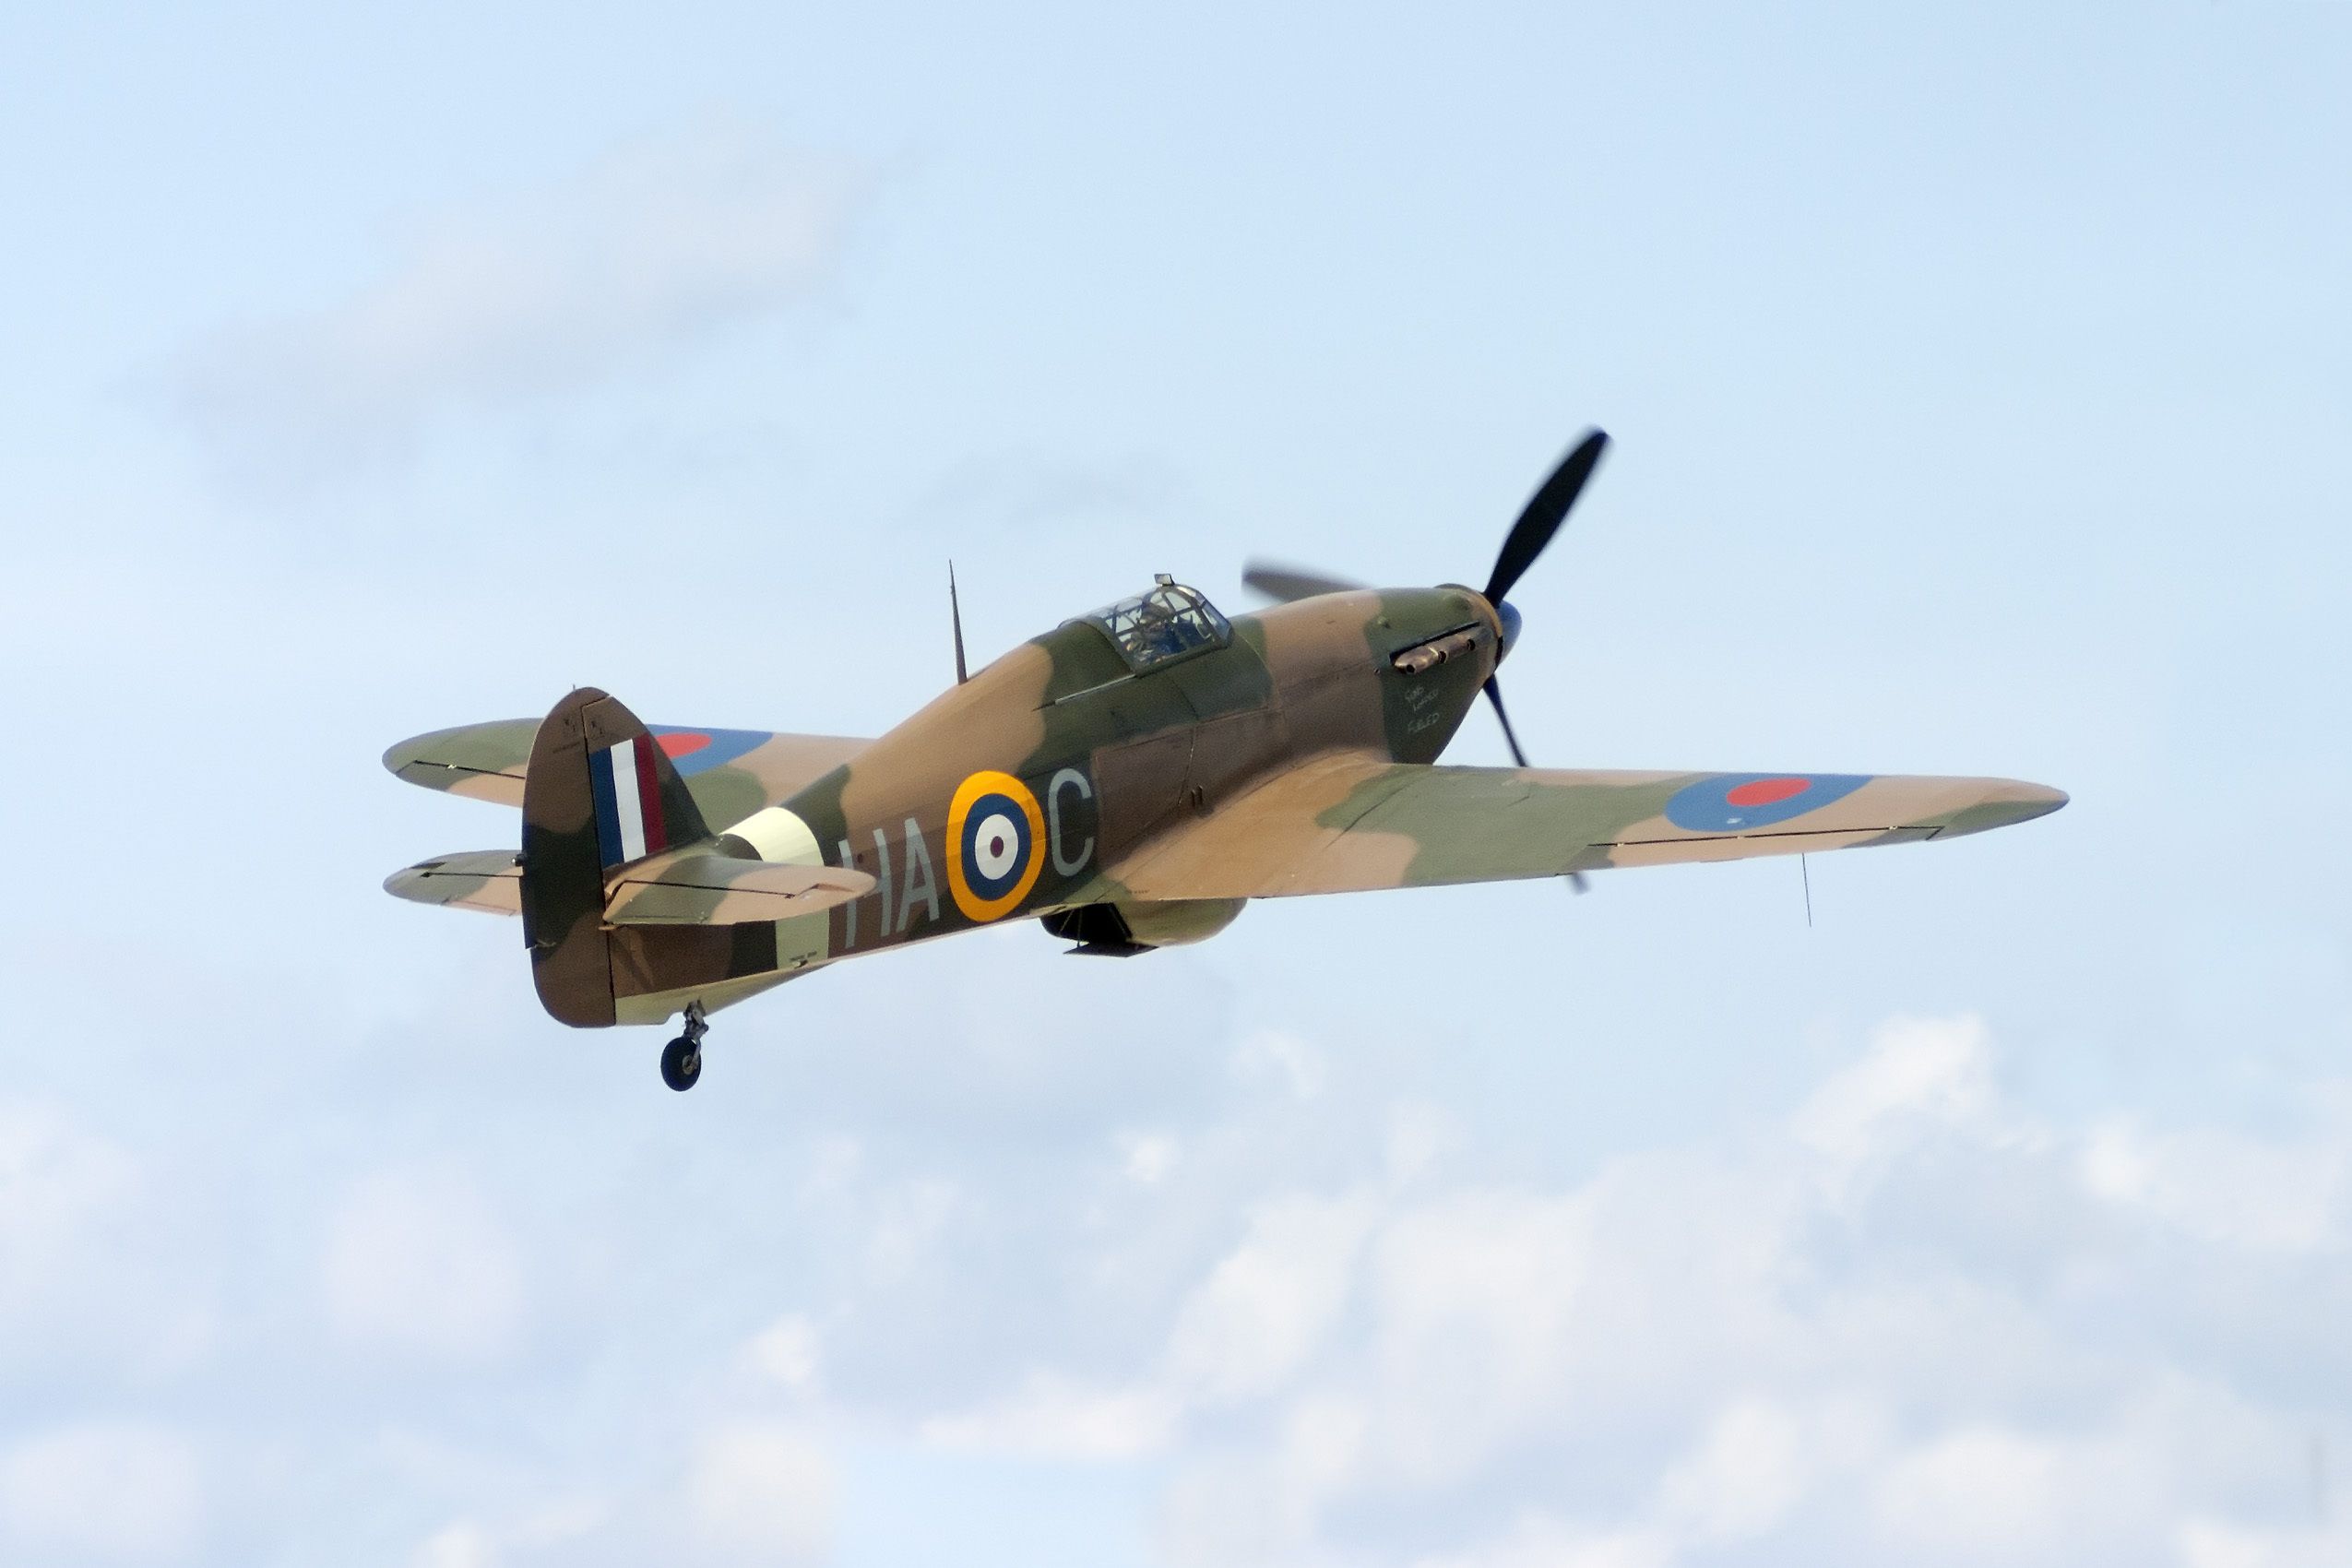 A Hawker Hurricane taking off into the sky.